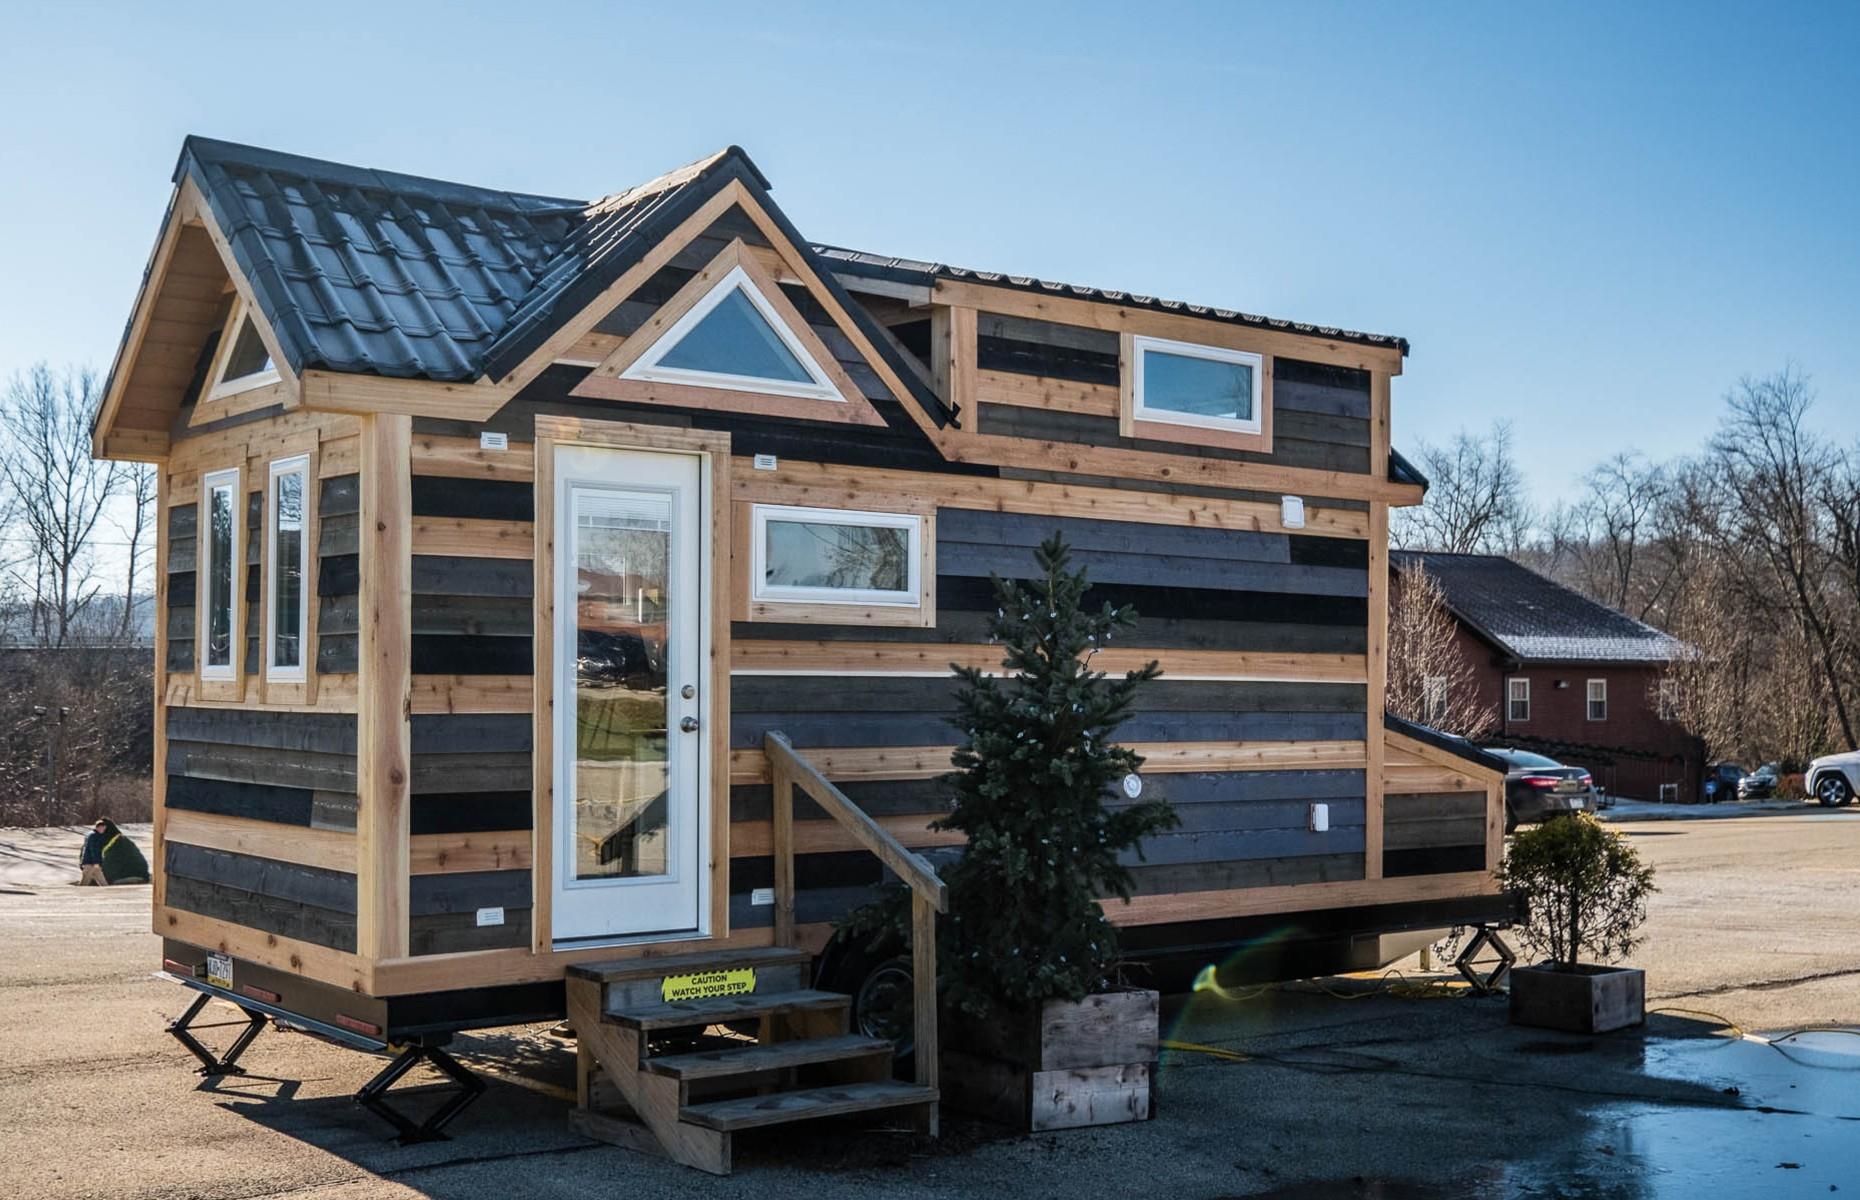 Terrific Tiny Homes That Everyone Can Afford To Buy